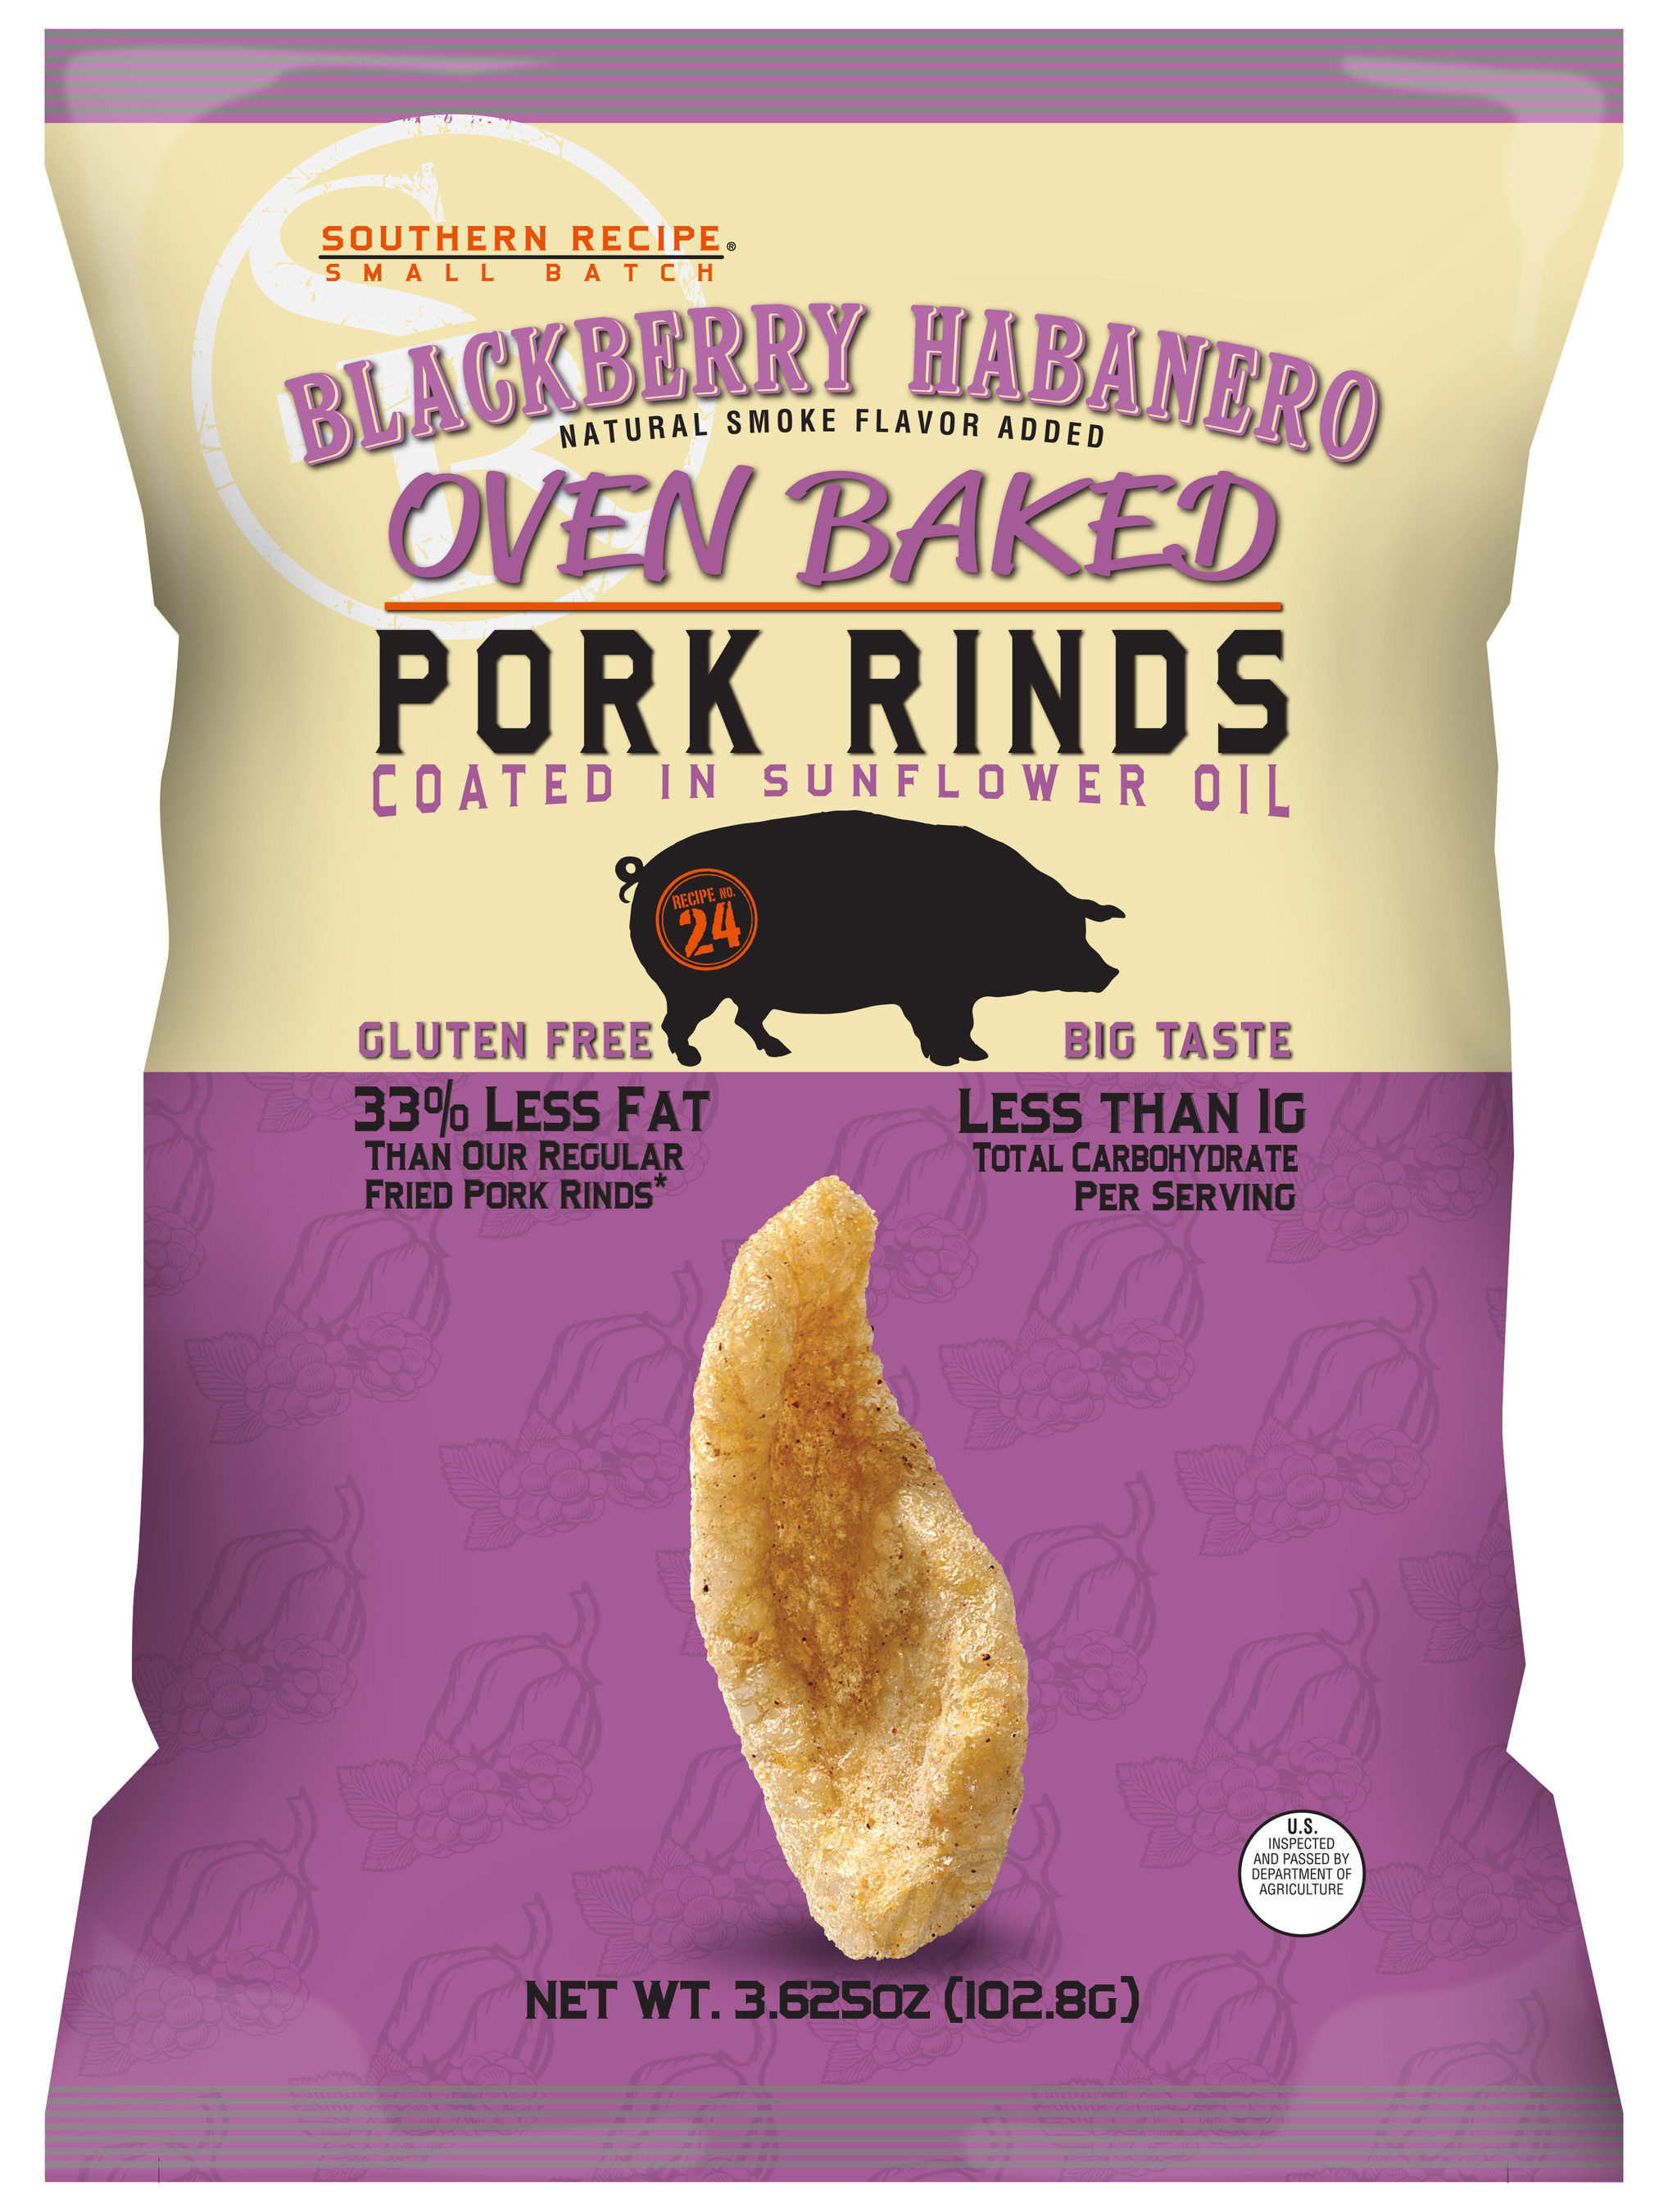 Southern Recipe Small Batch Debuts Baked Pork Rinds | NOSH